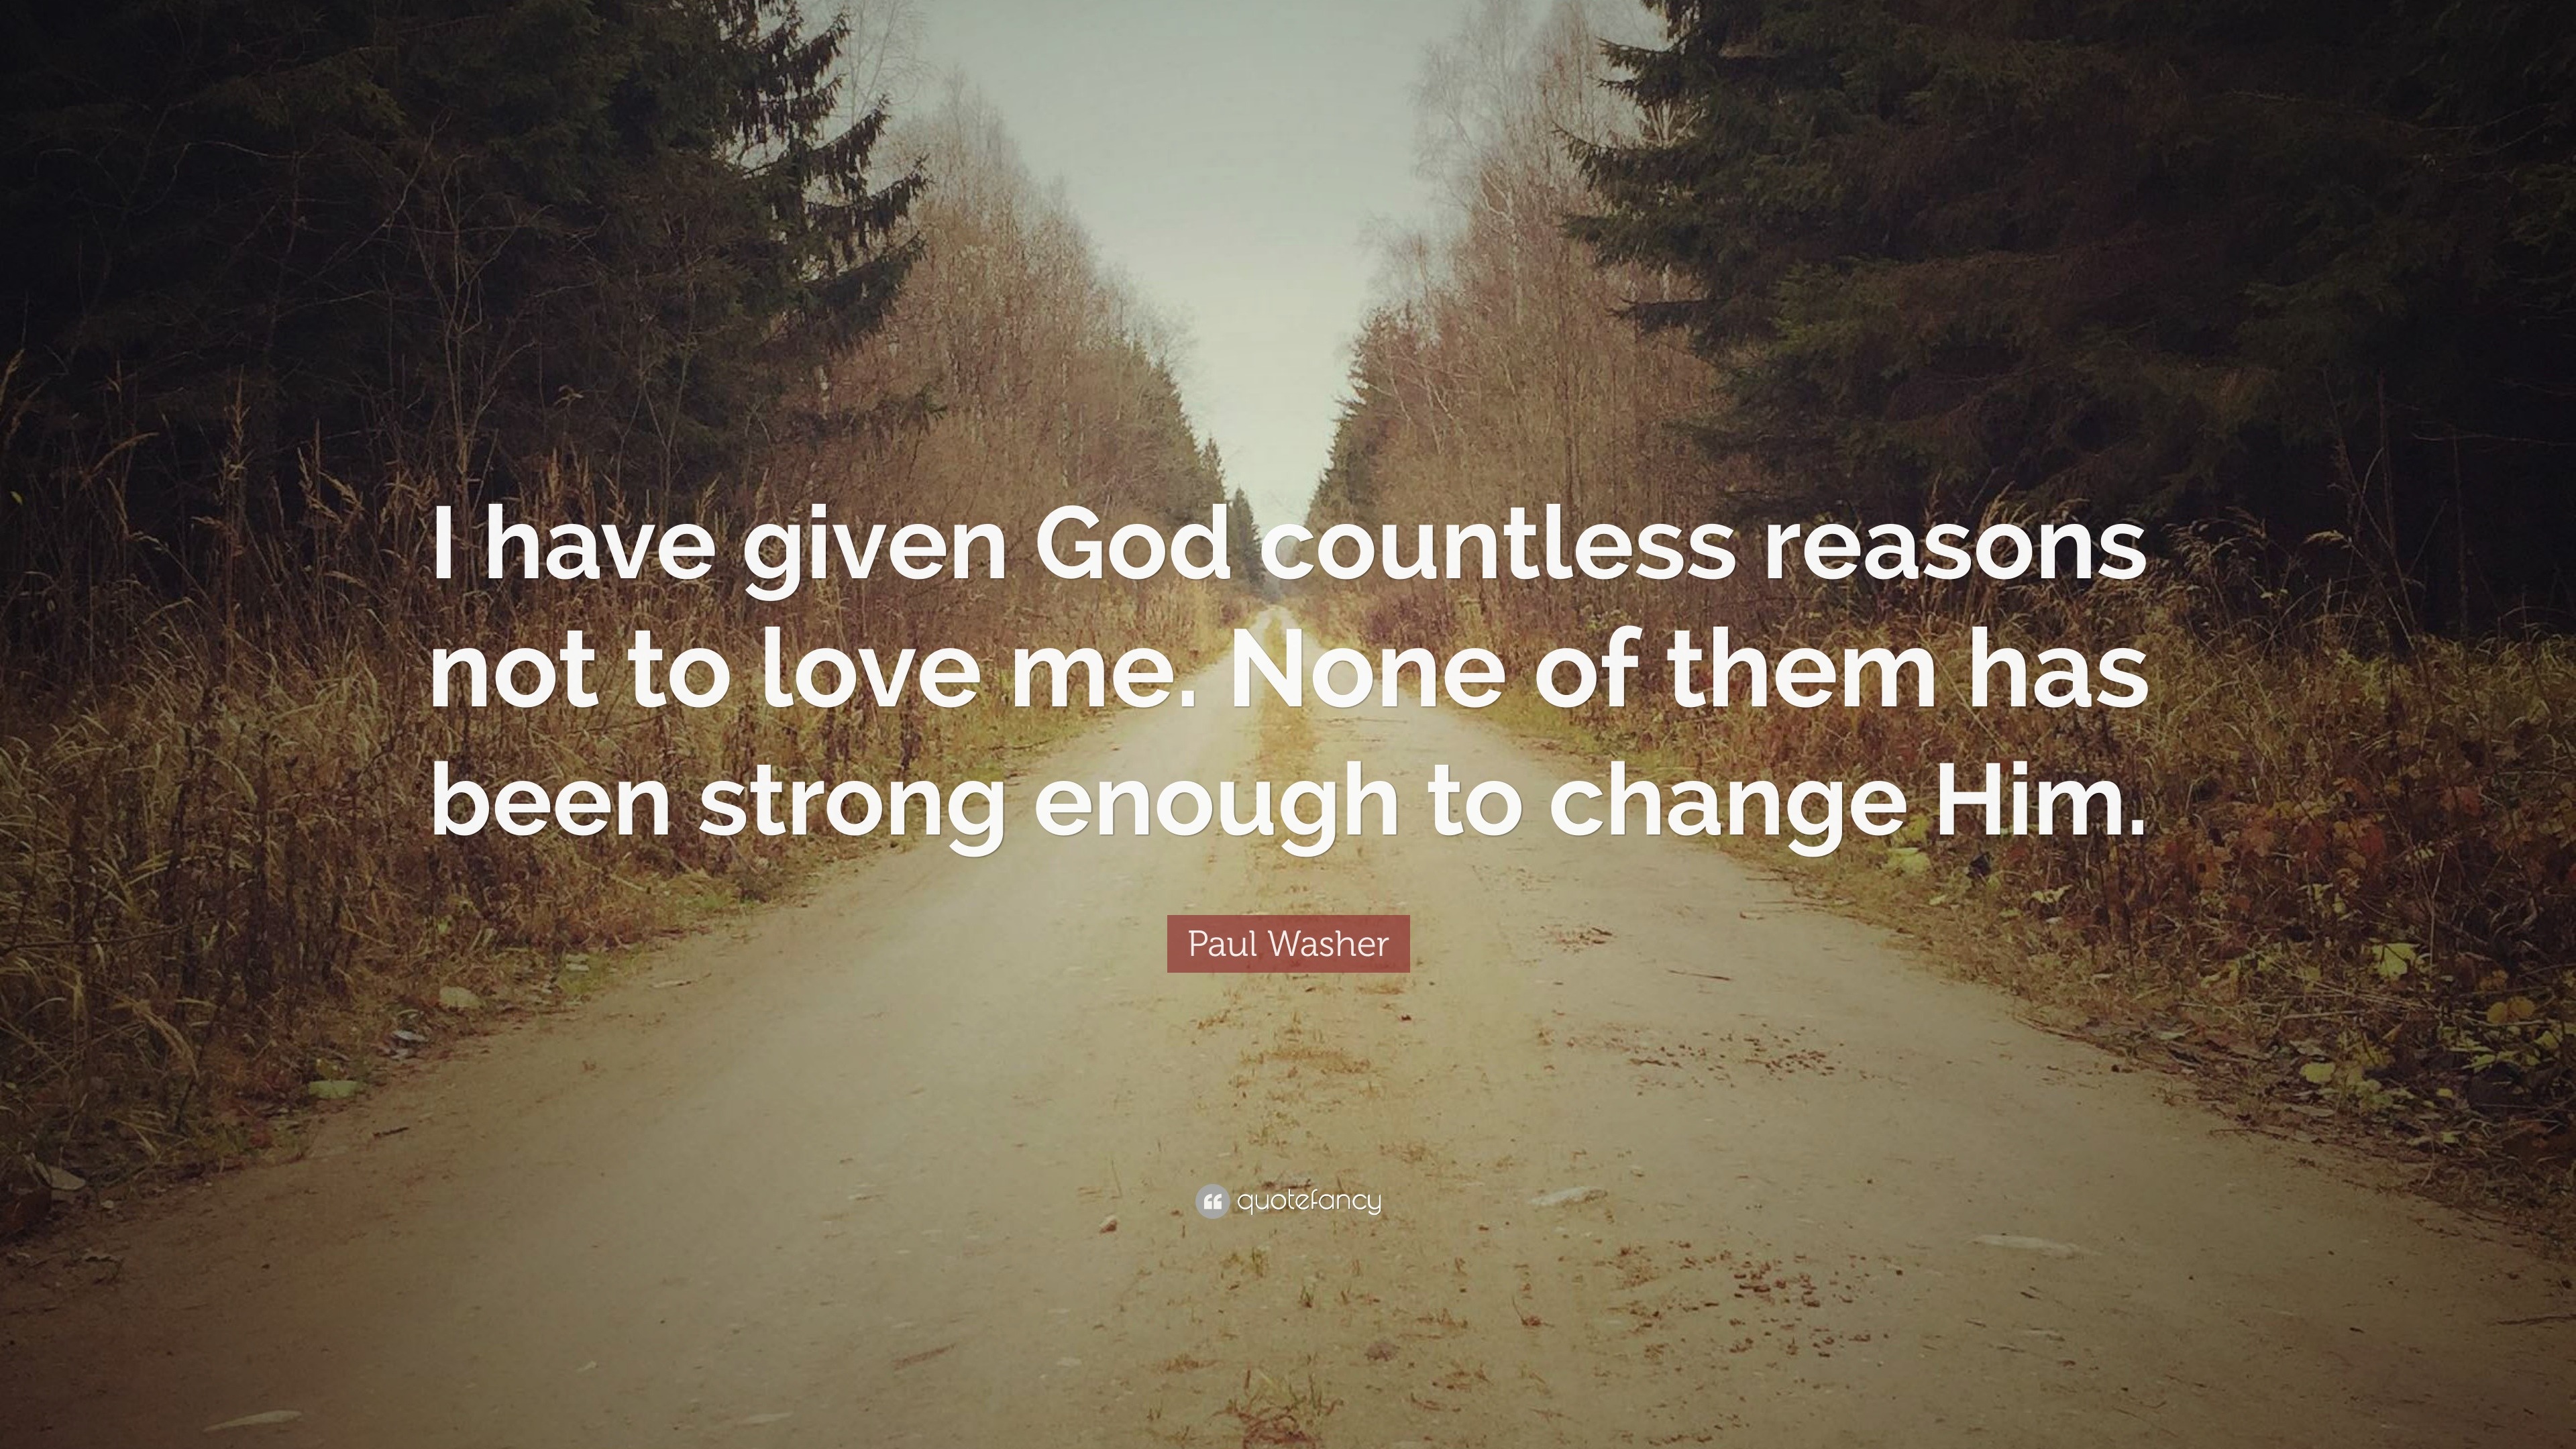 817904 Paul Washer Quote I have given God countless reasons not to love